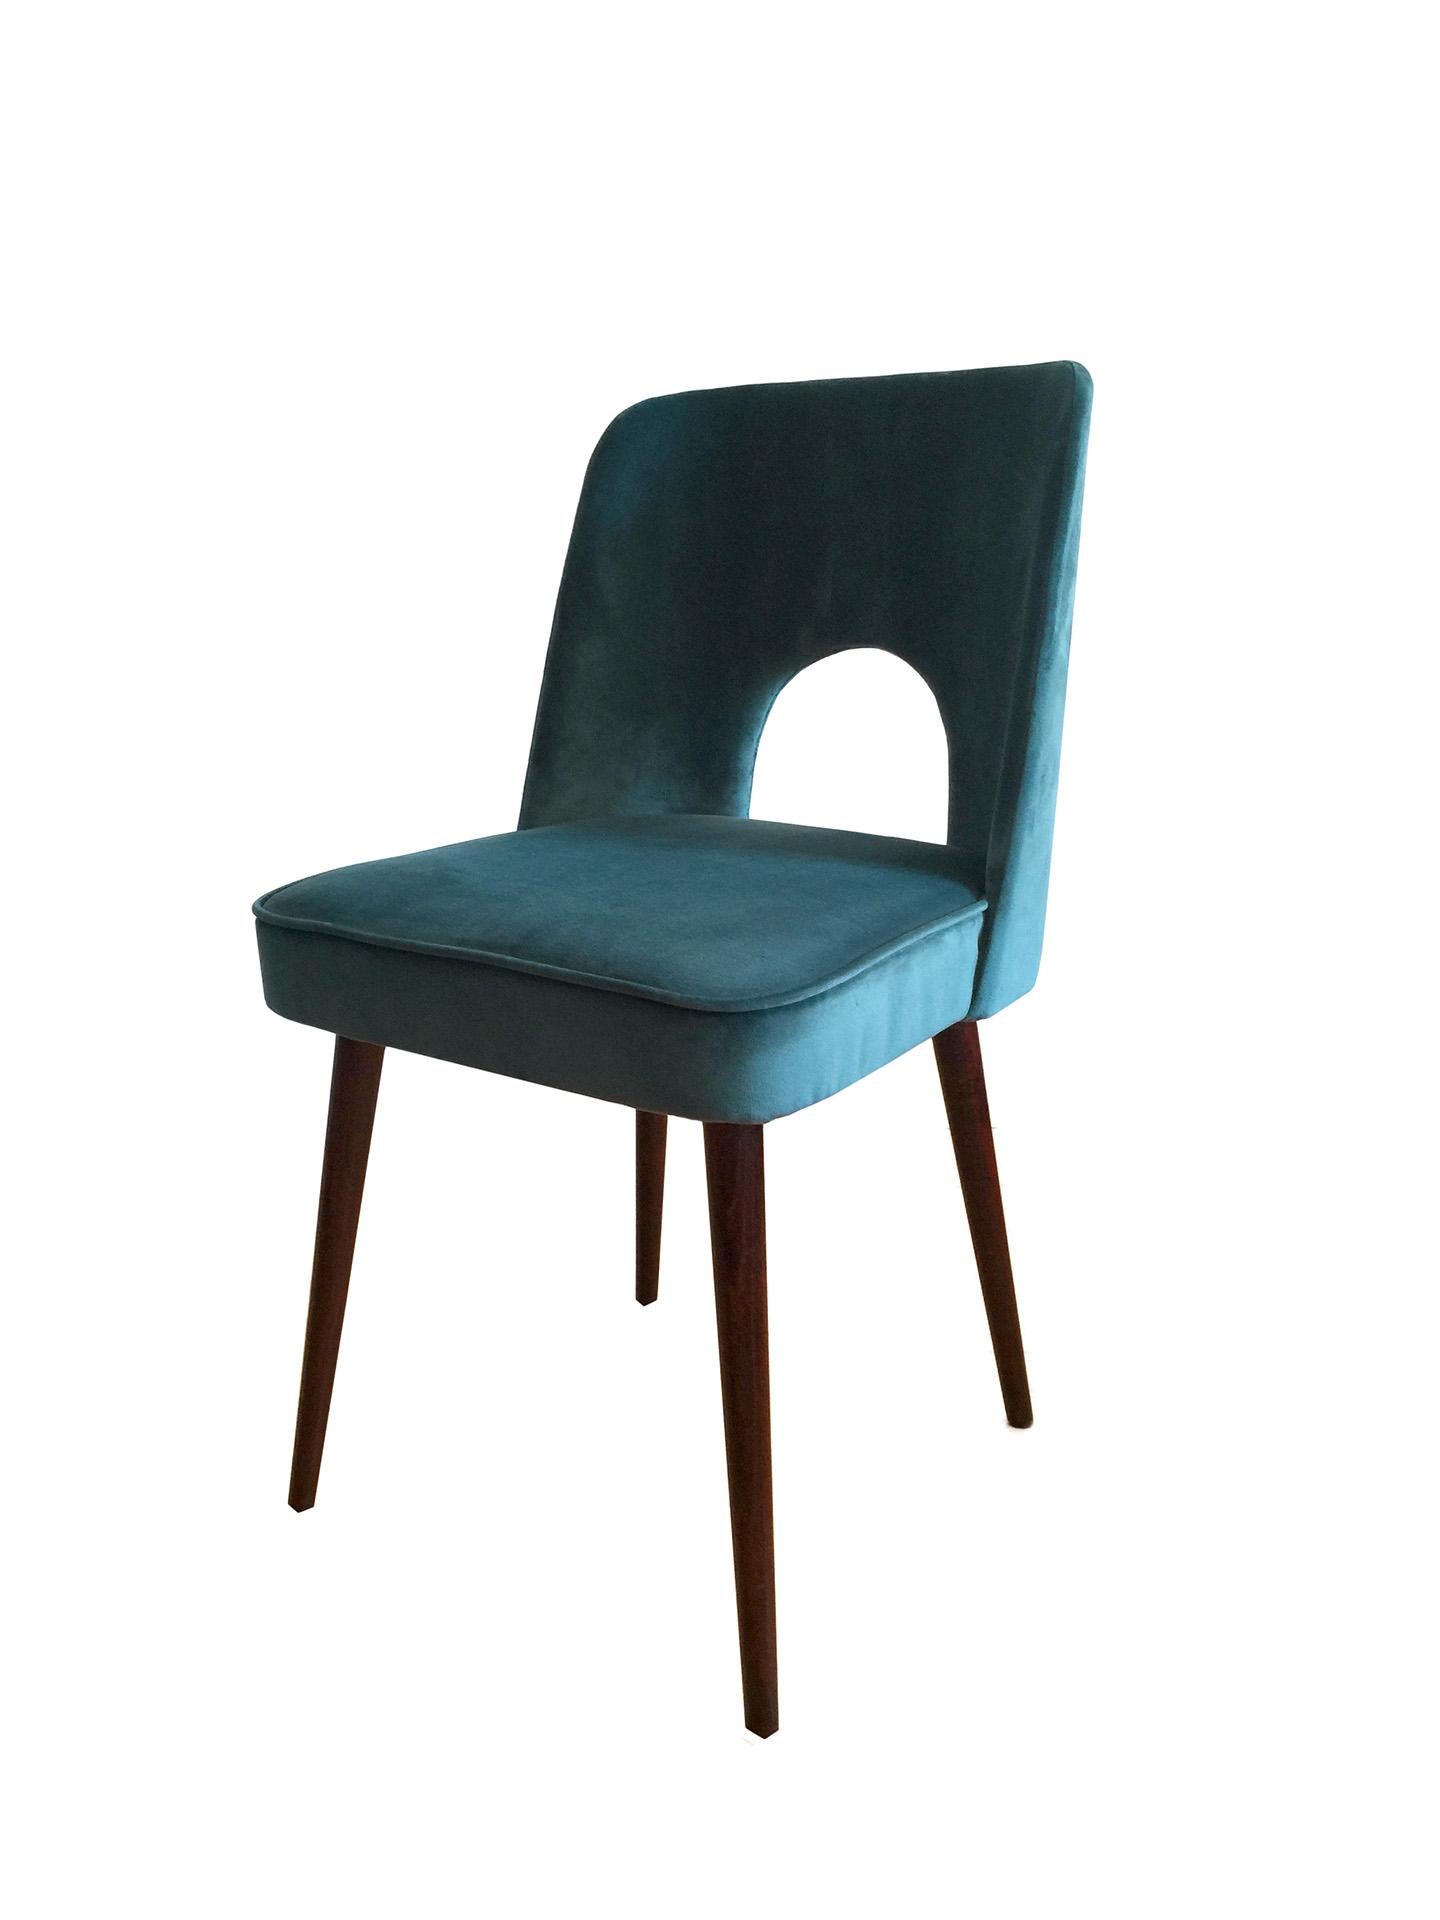 This set of two dining chairs with a modernist silhouette was designed circa 1962 and manufactured by Slupskie Fabryki Mebli in Poland. The structure is made of plywood and beech. The upholstery is made of high-quality fabric in a deep sea-blue